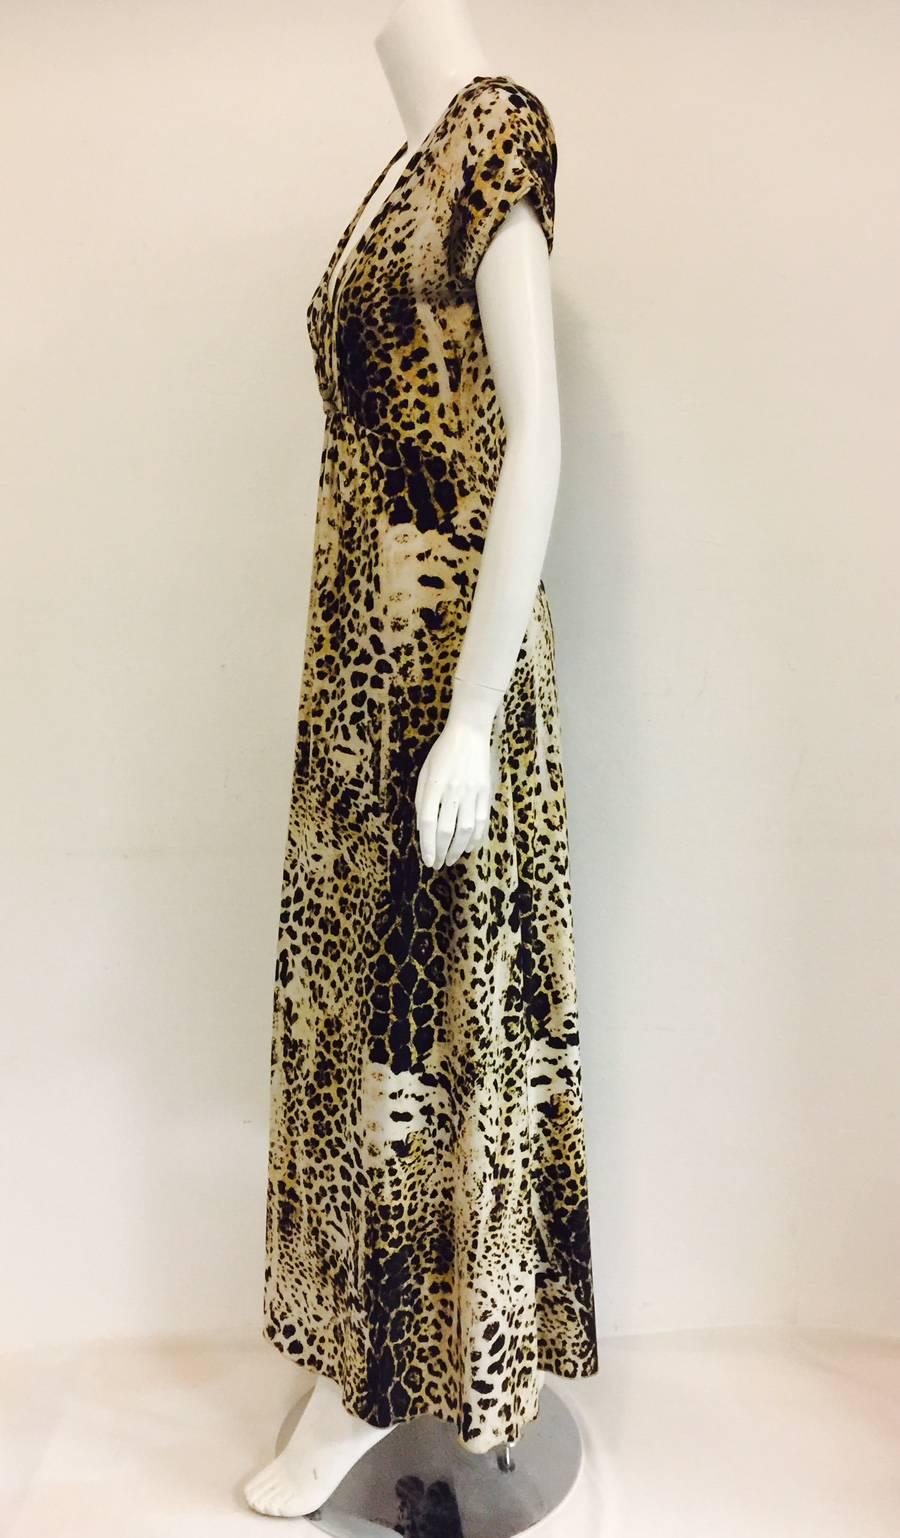 Radiant Roberto Cavalli's Leopard Print Inspired Informal Long Dress   In Excellent Condition For Sale In Palm Beach, FL